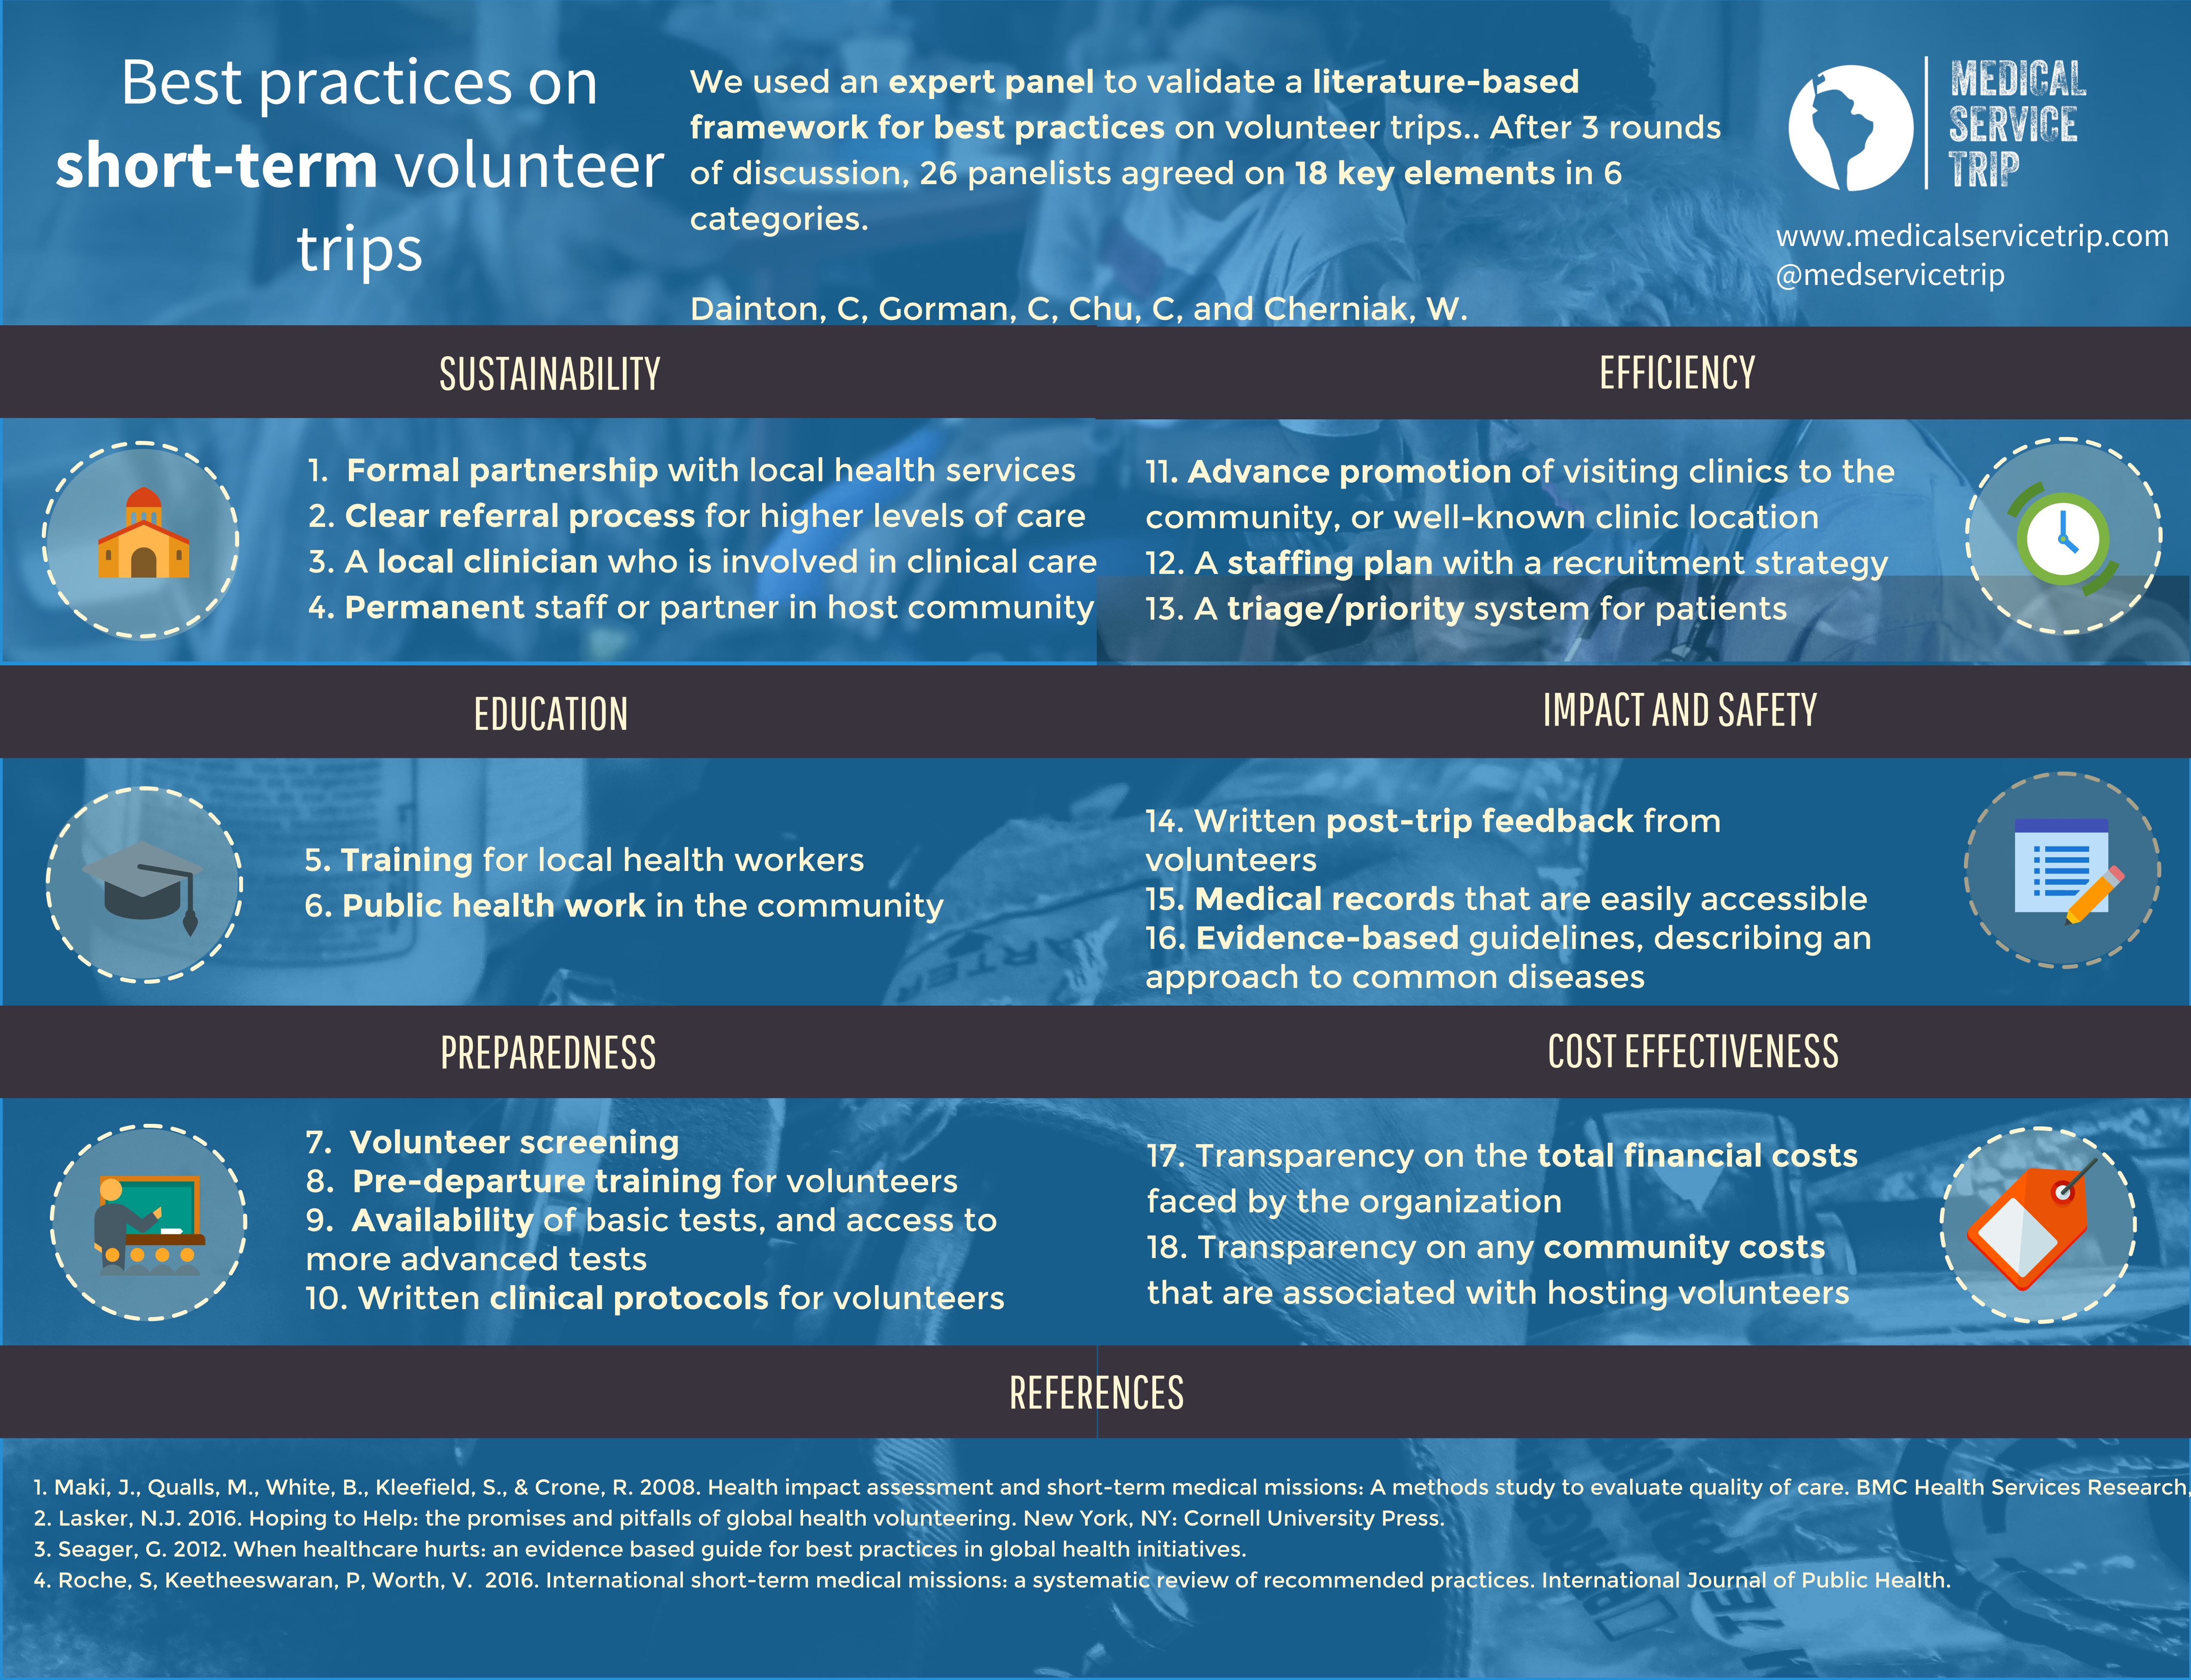 Best practices for medical missions and MSTs